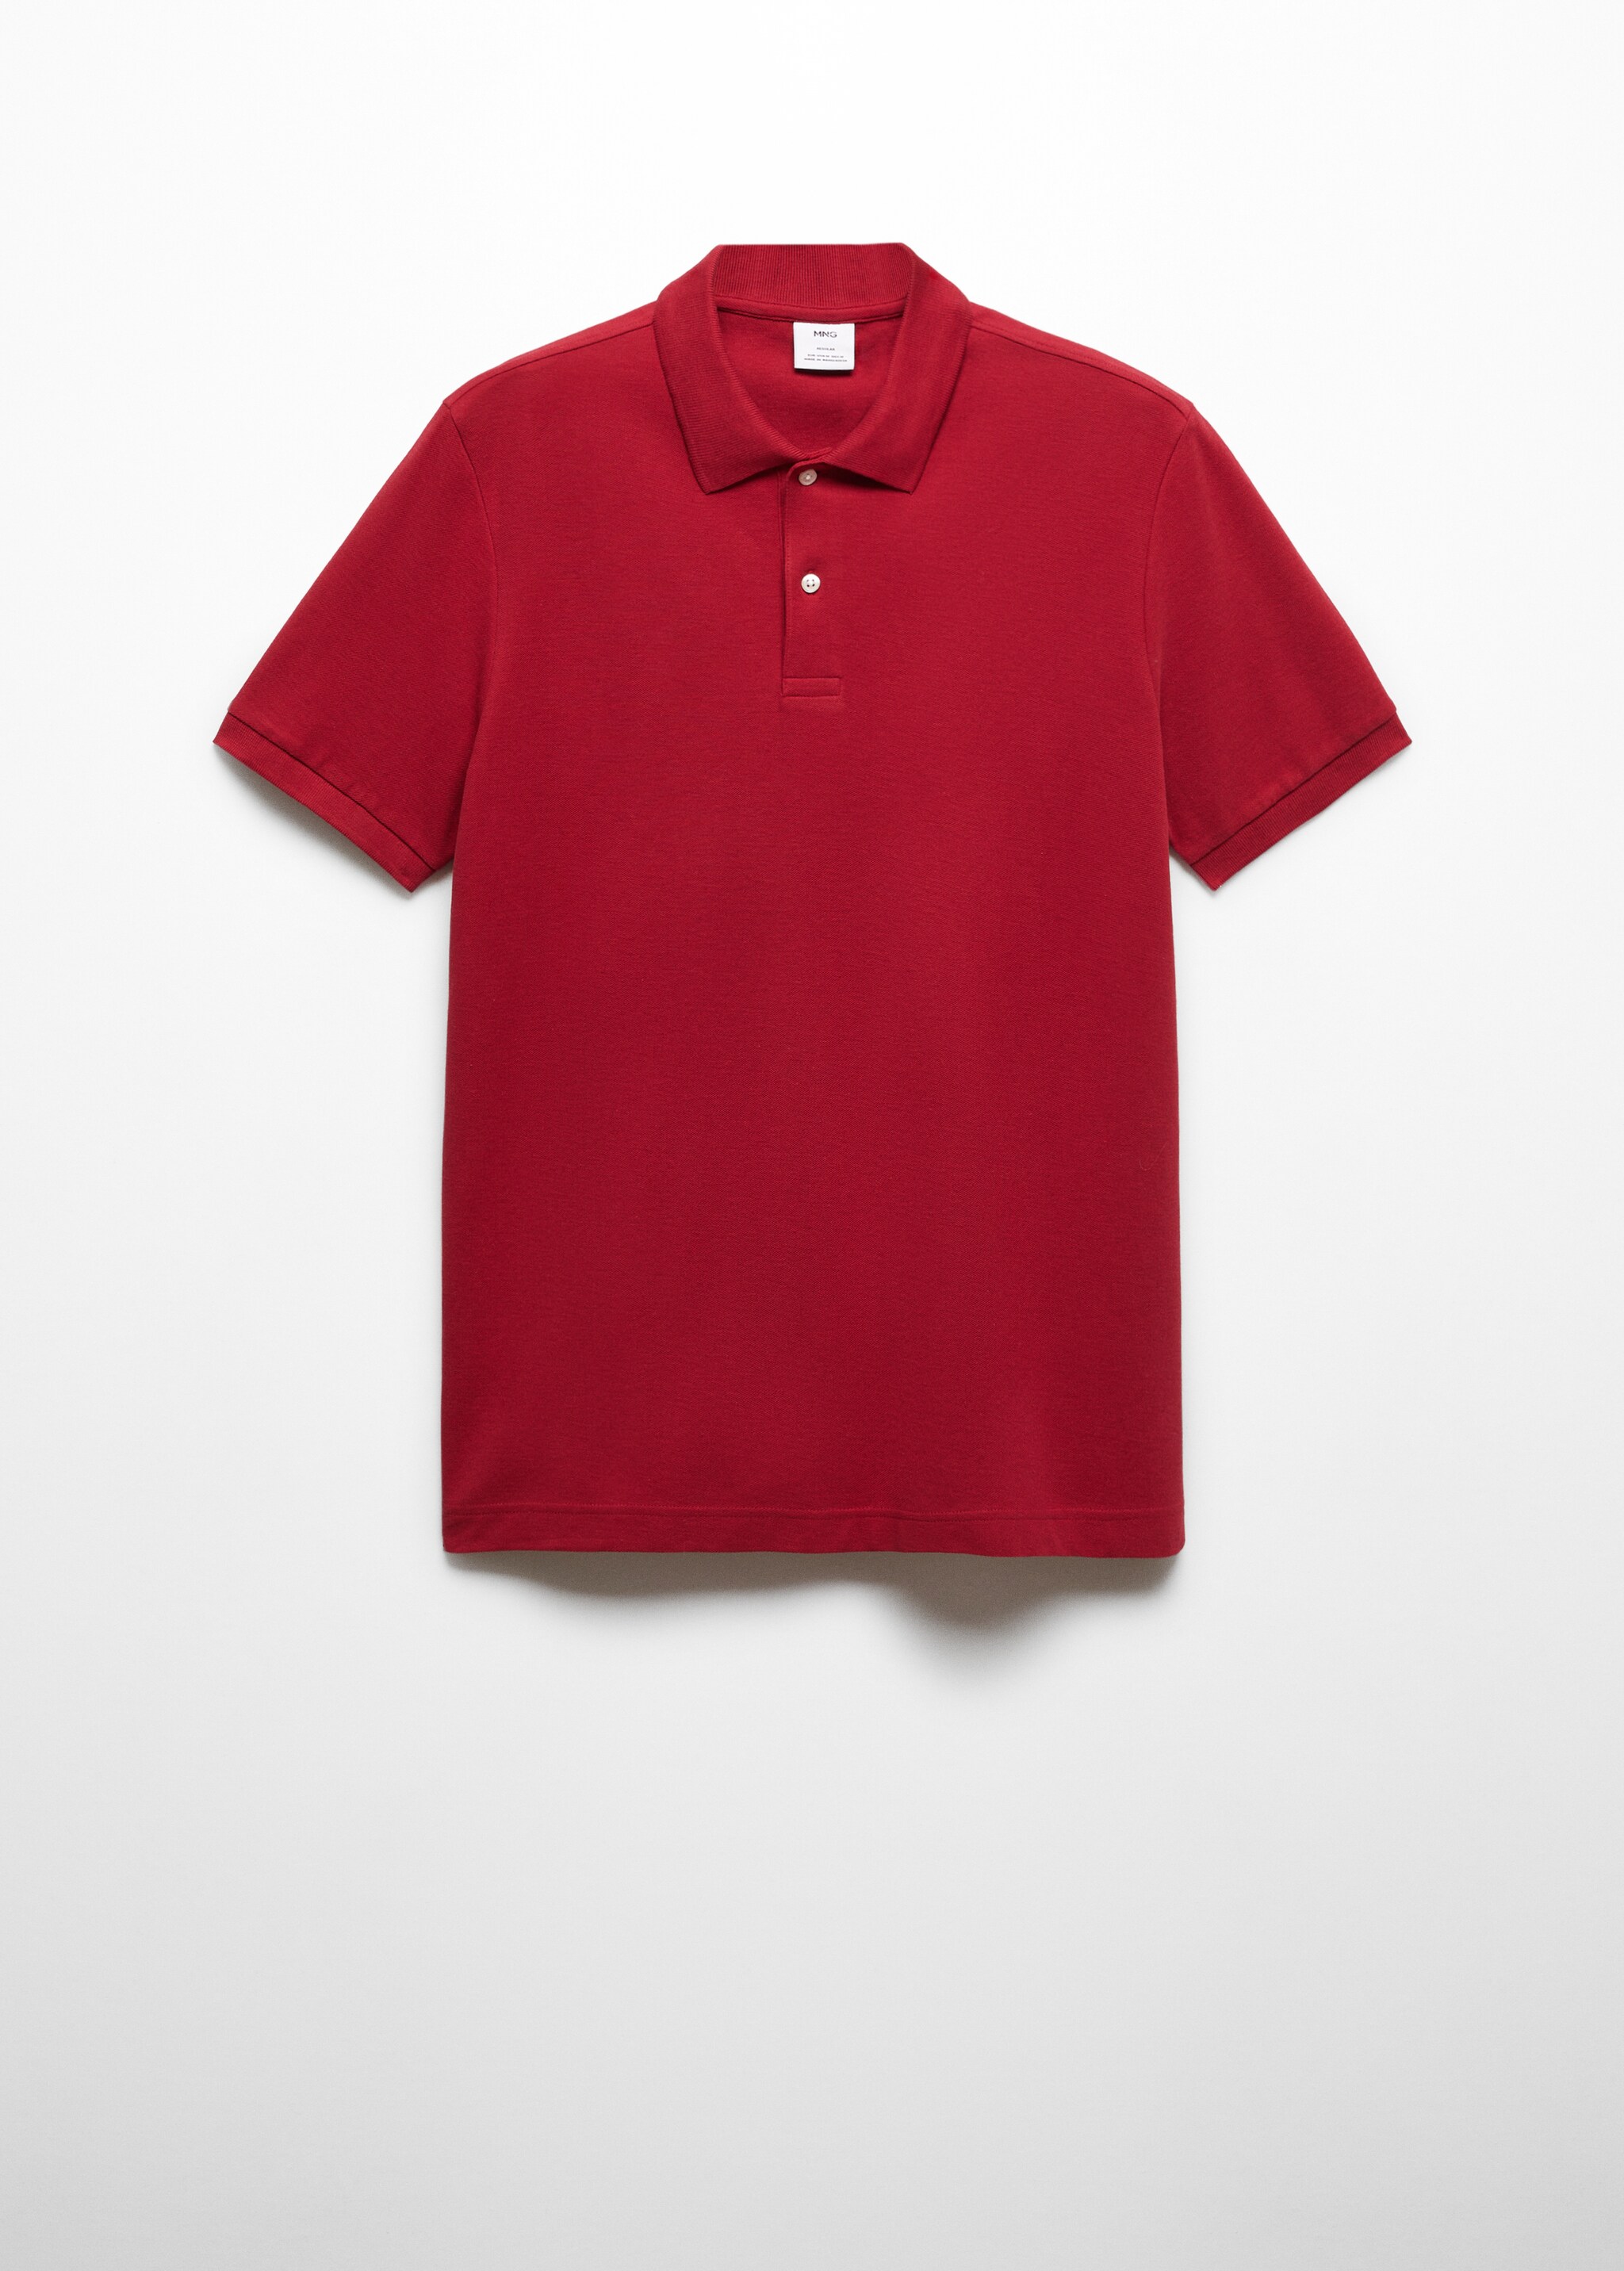 100% cotton regular-fit polo shirt - Article without model